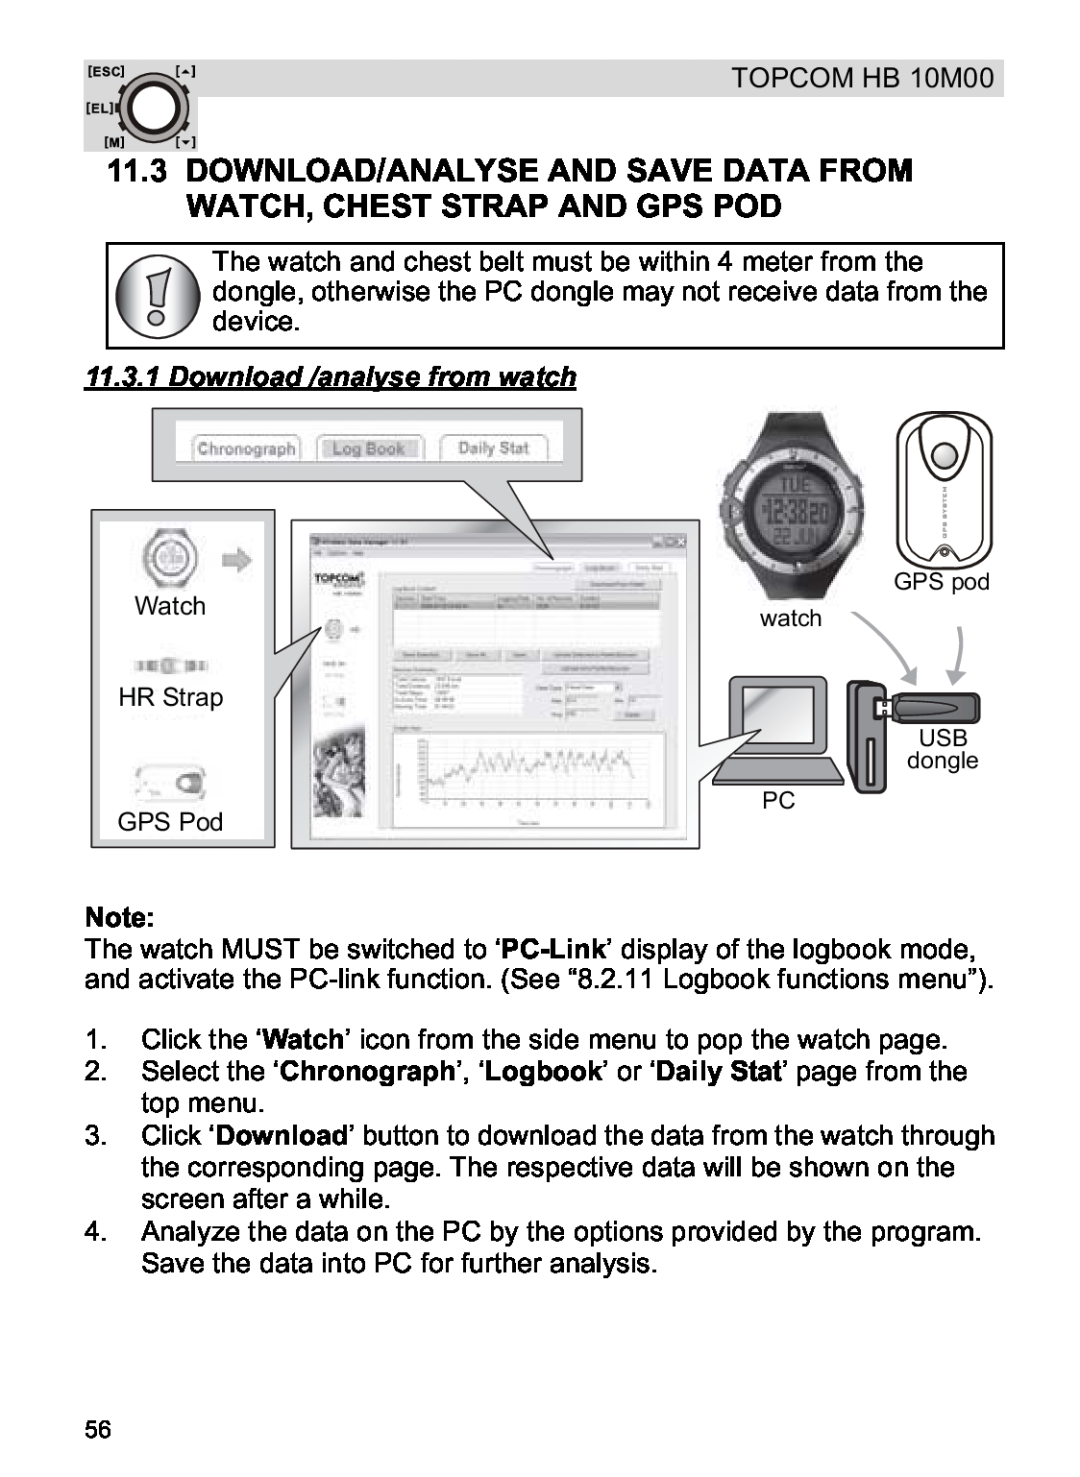 Topcom HB 10M00 manual Download /analyse from watch, Watch HR Strap GPS Pod 